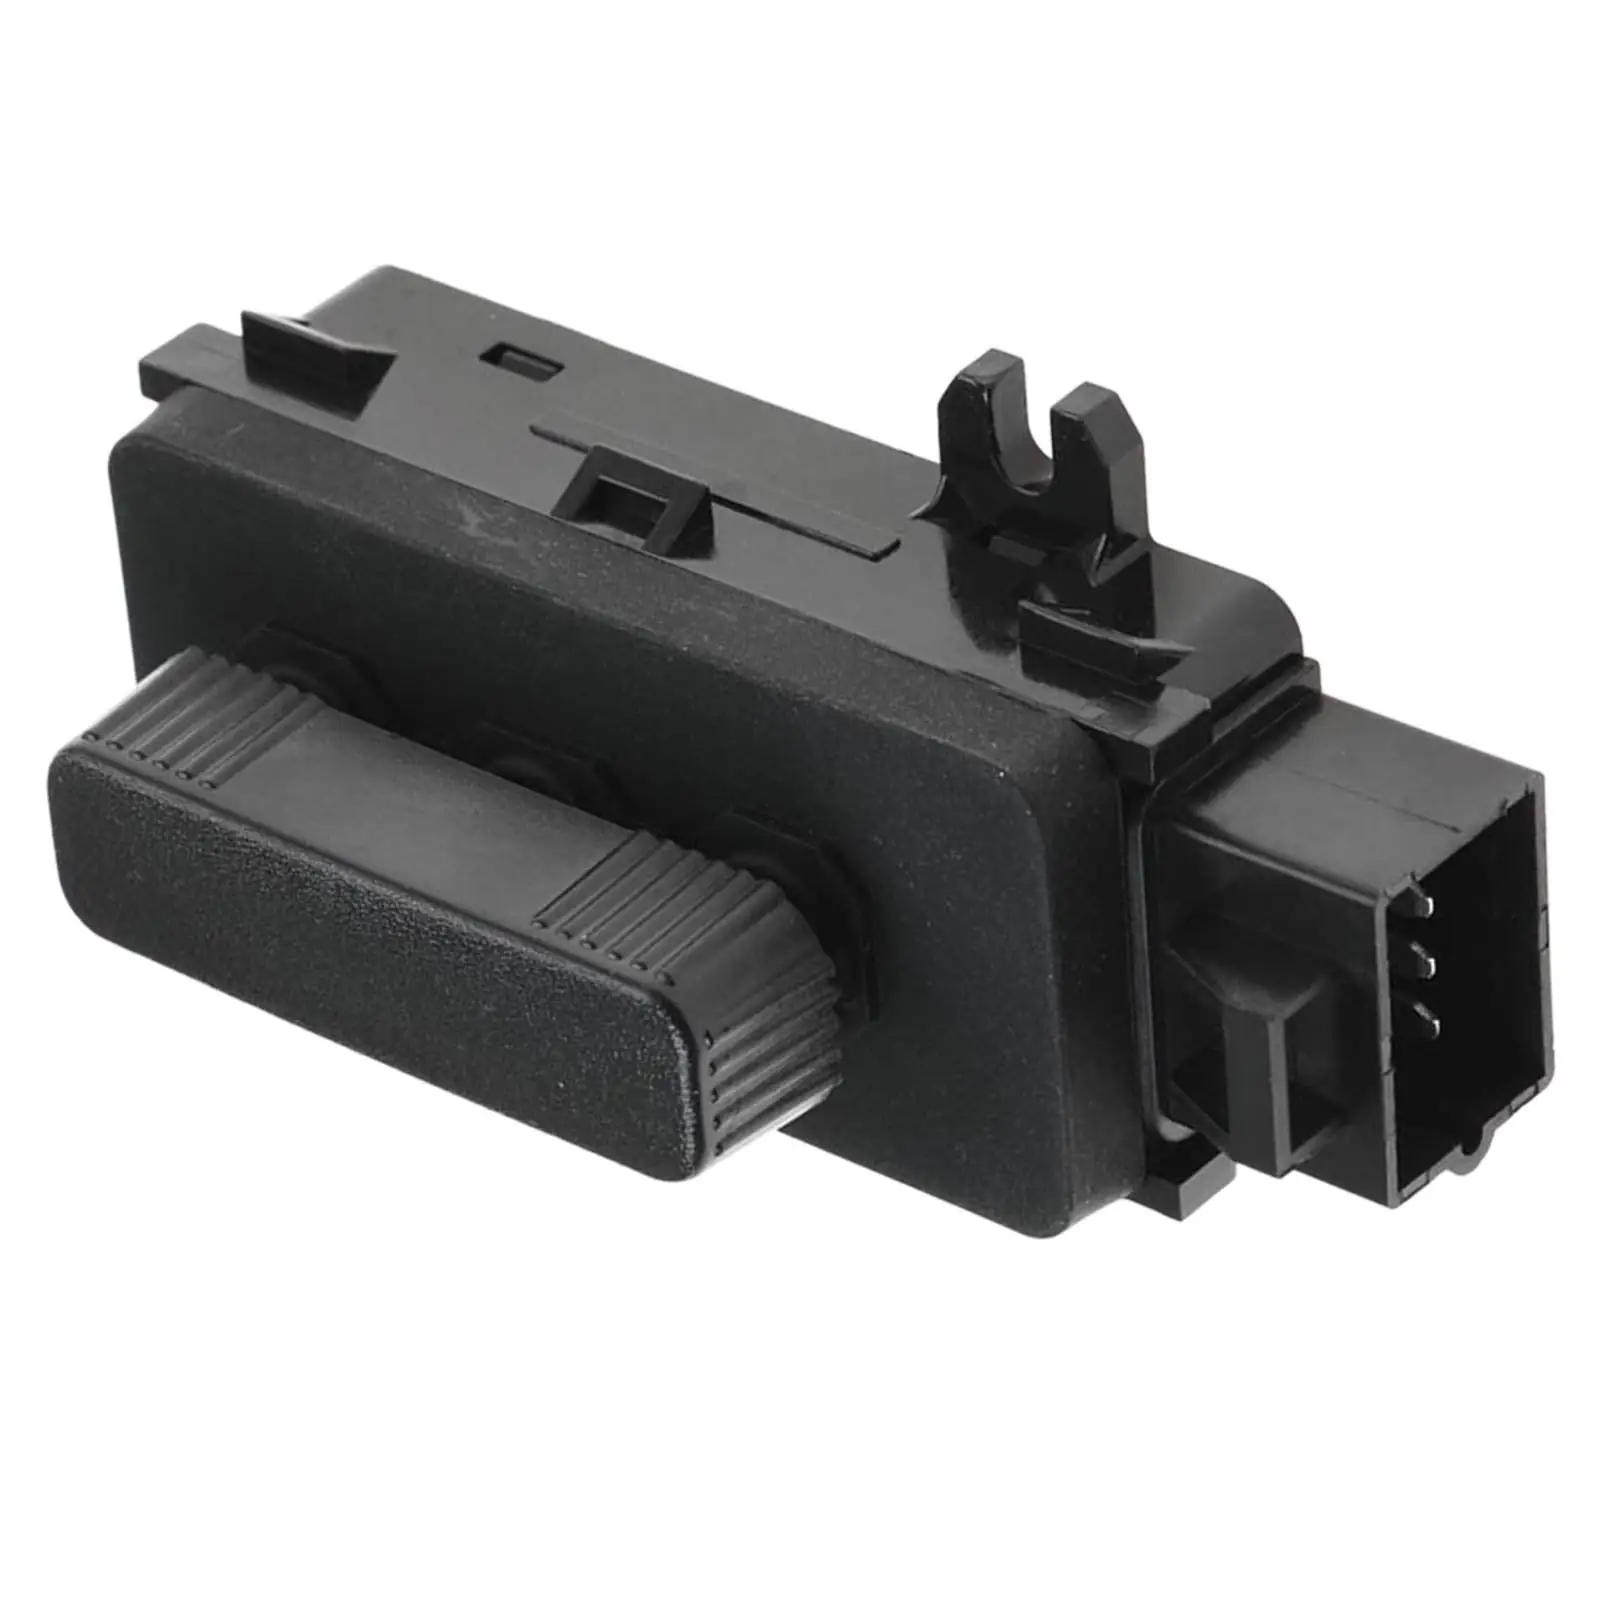 Seat Control Switch Black Accessories GM 12450256 Supplies Psw21 Interchange SW4168 Plastic Adjuster Fit for Chevrolet